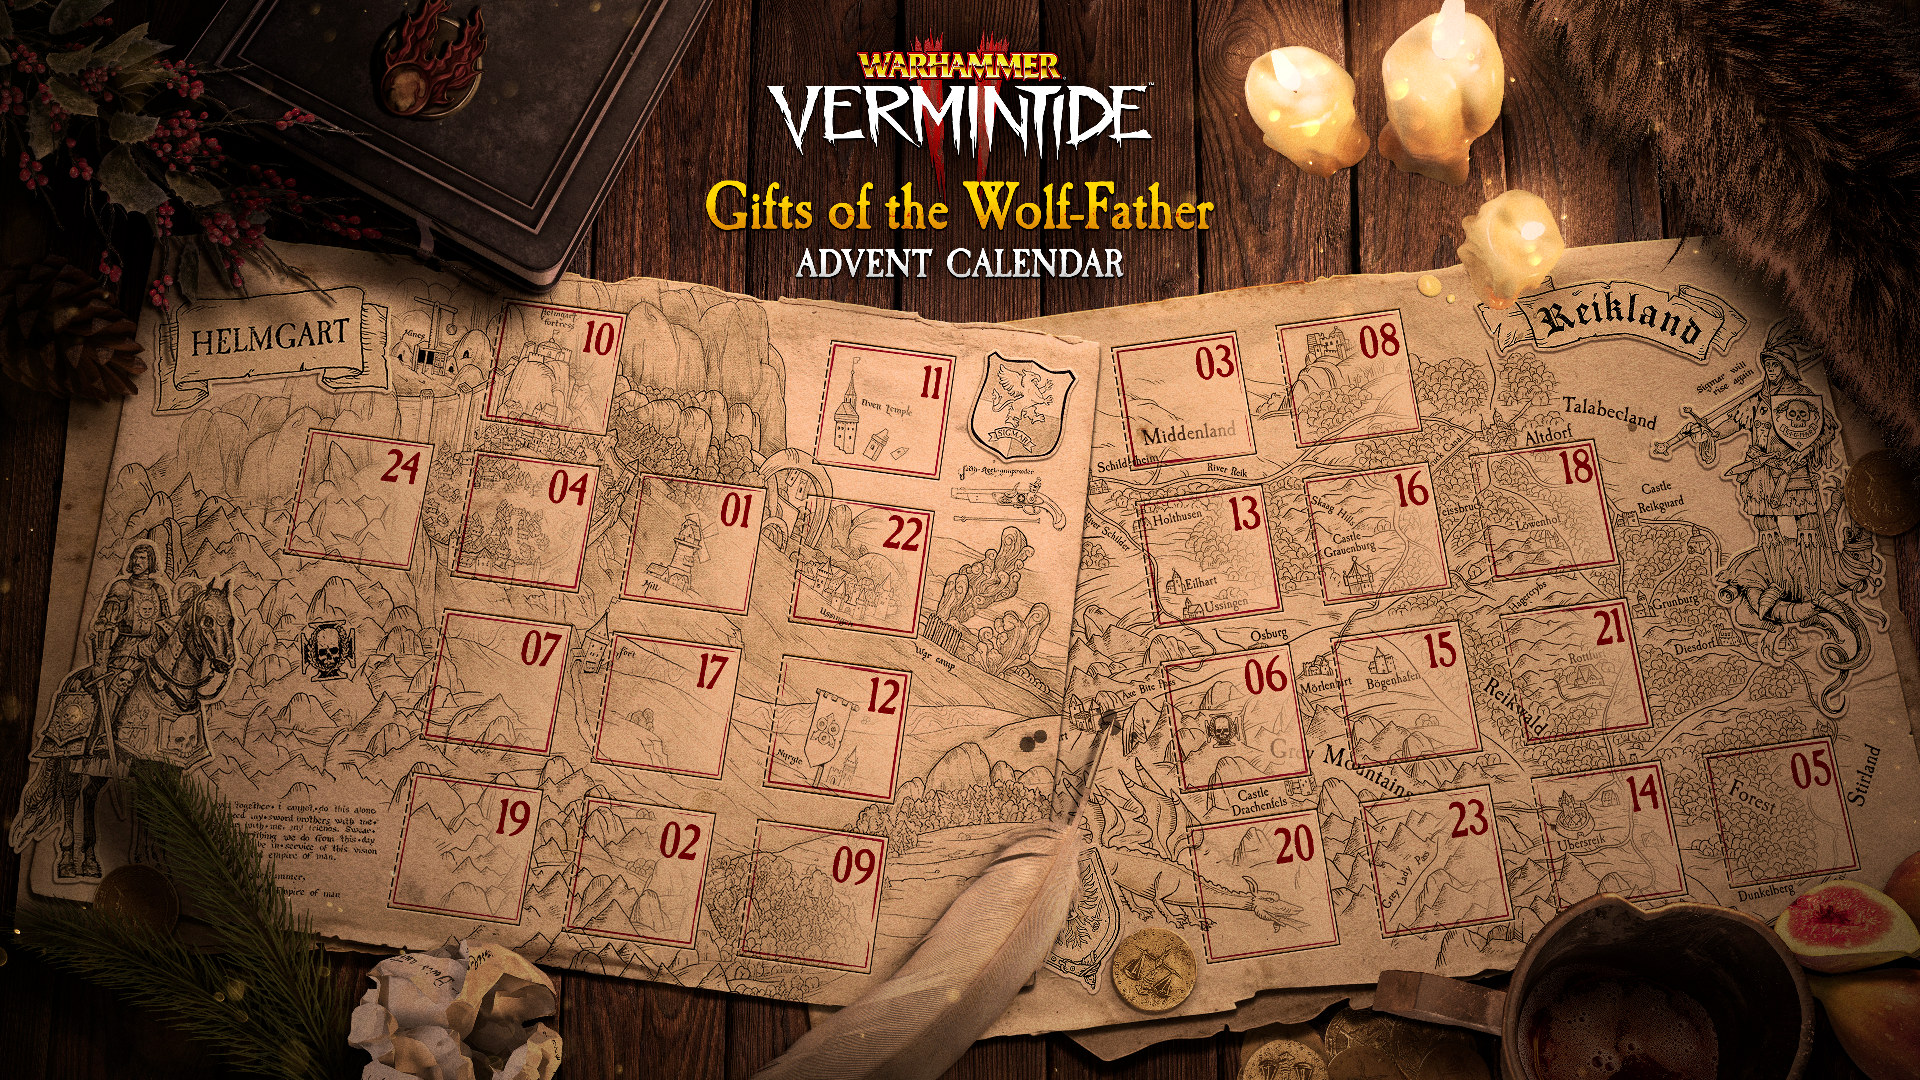 Log in this Mondstille to Receive Gifts from the Wolf-Father